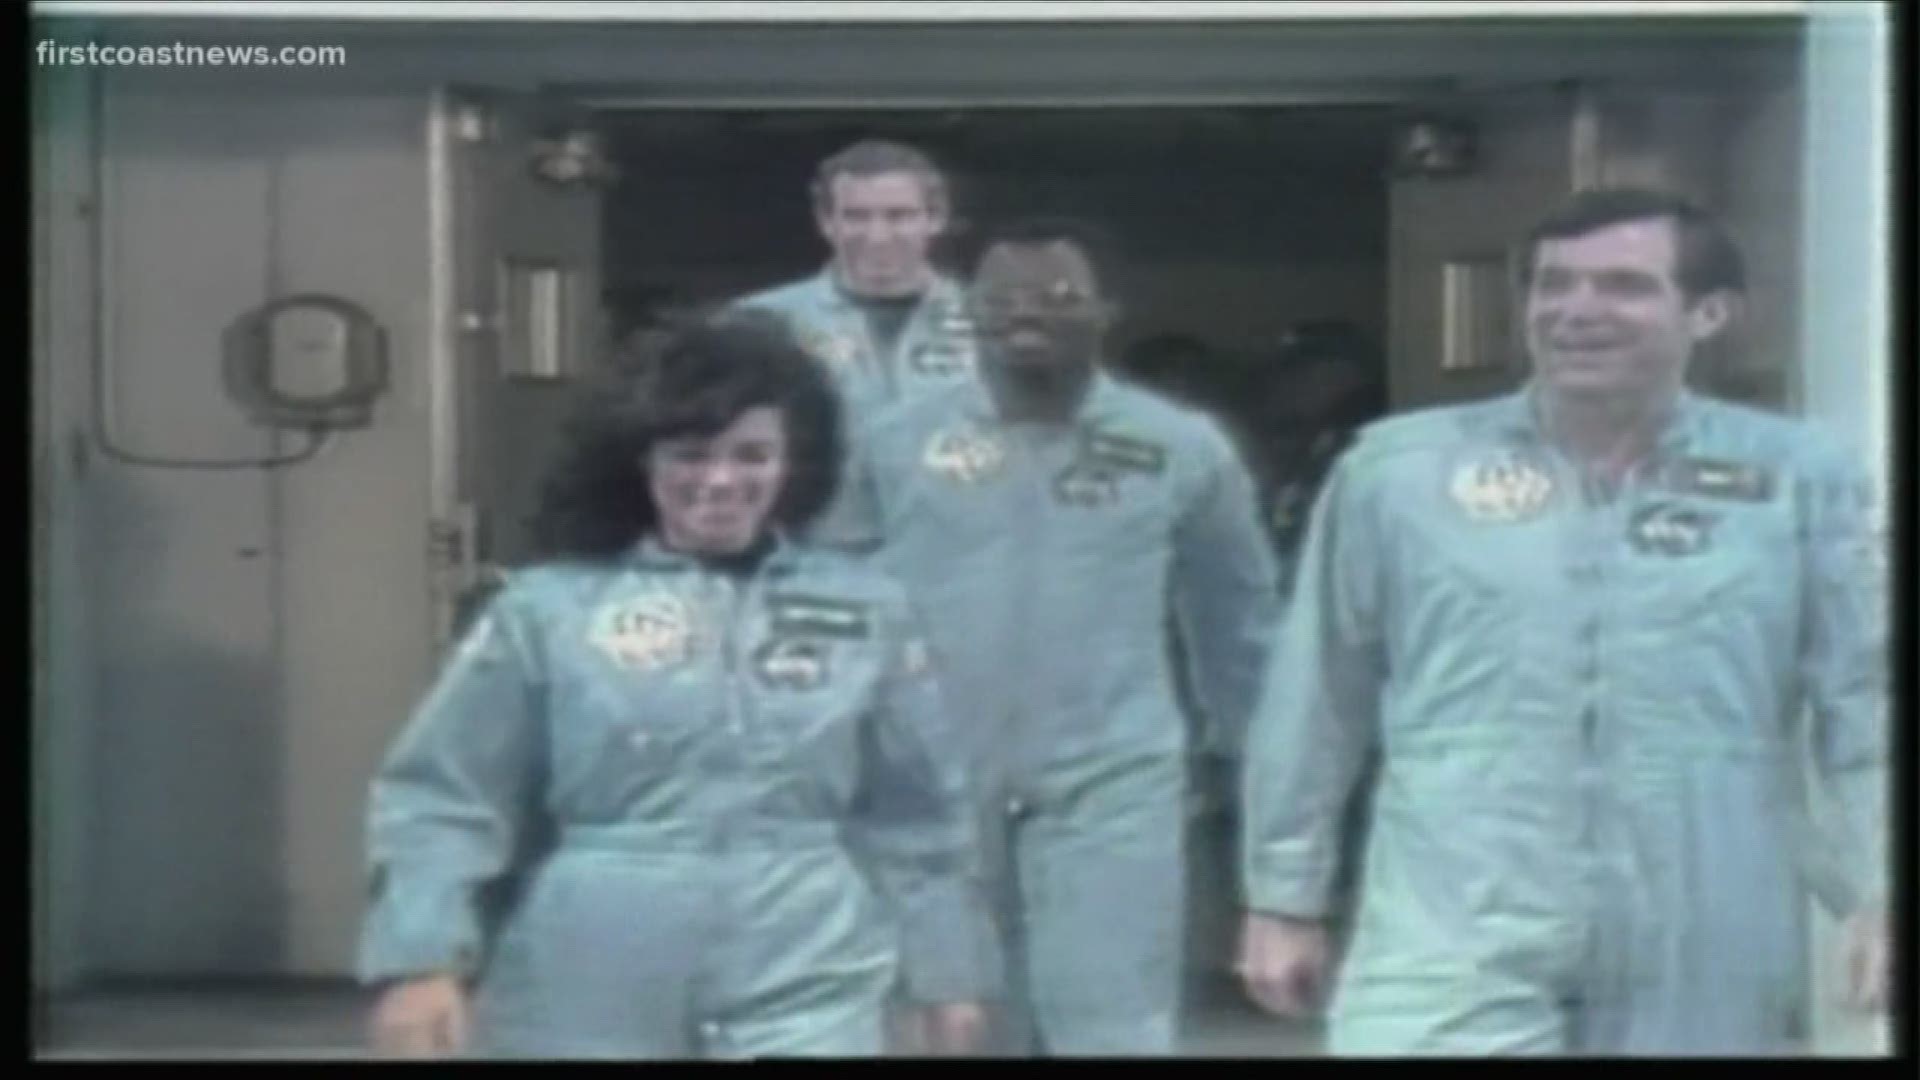 Thirty-four years ago today, the space shuttle Challenger exploded 73 seconds after liftoff.